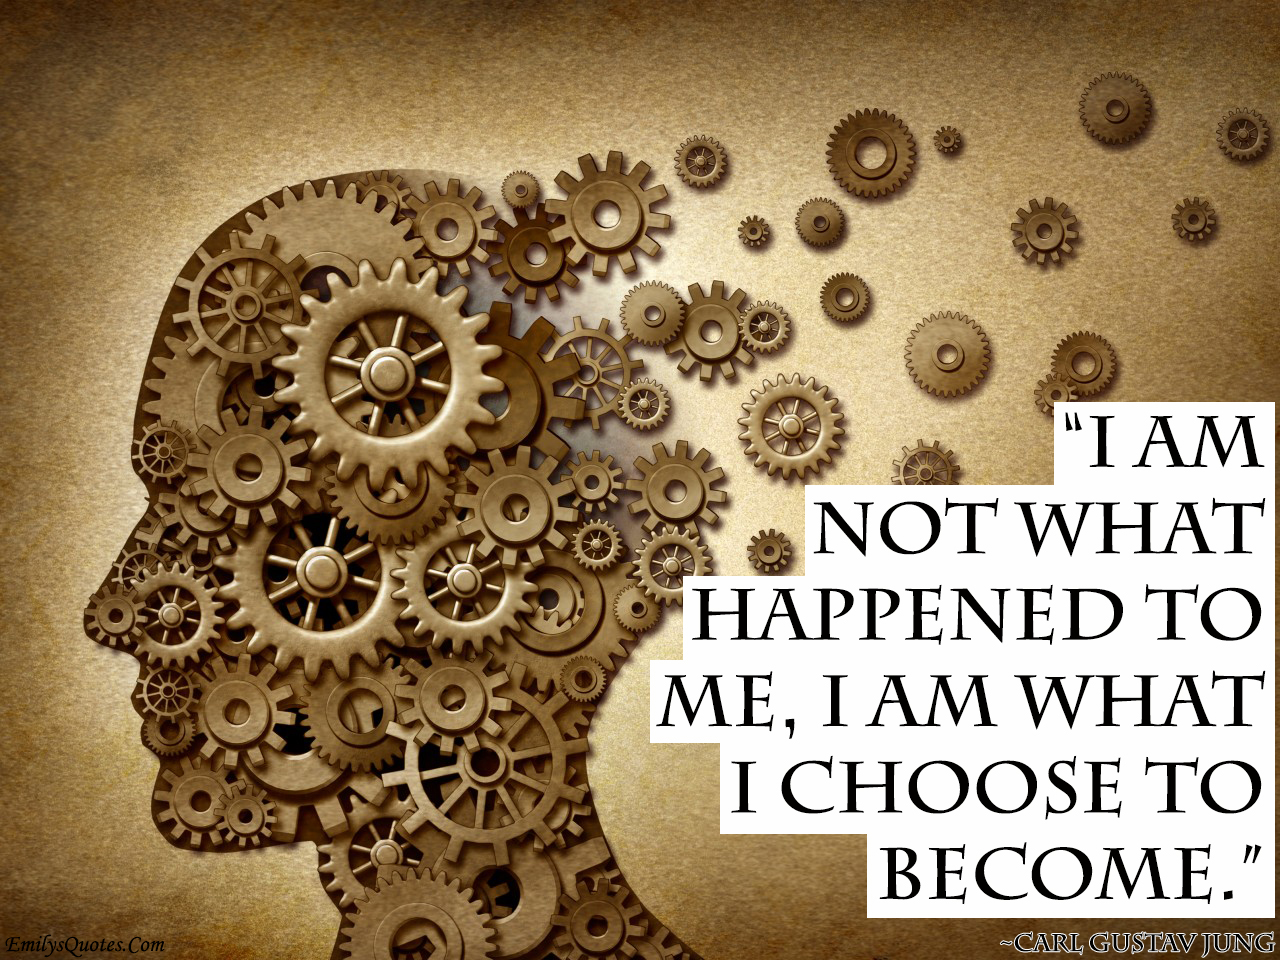 I am not what happened to me, I am what I choose to become